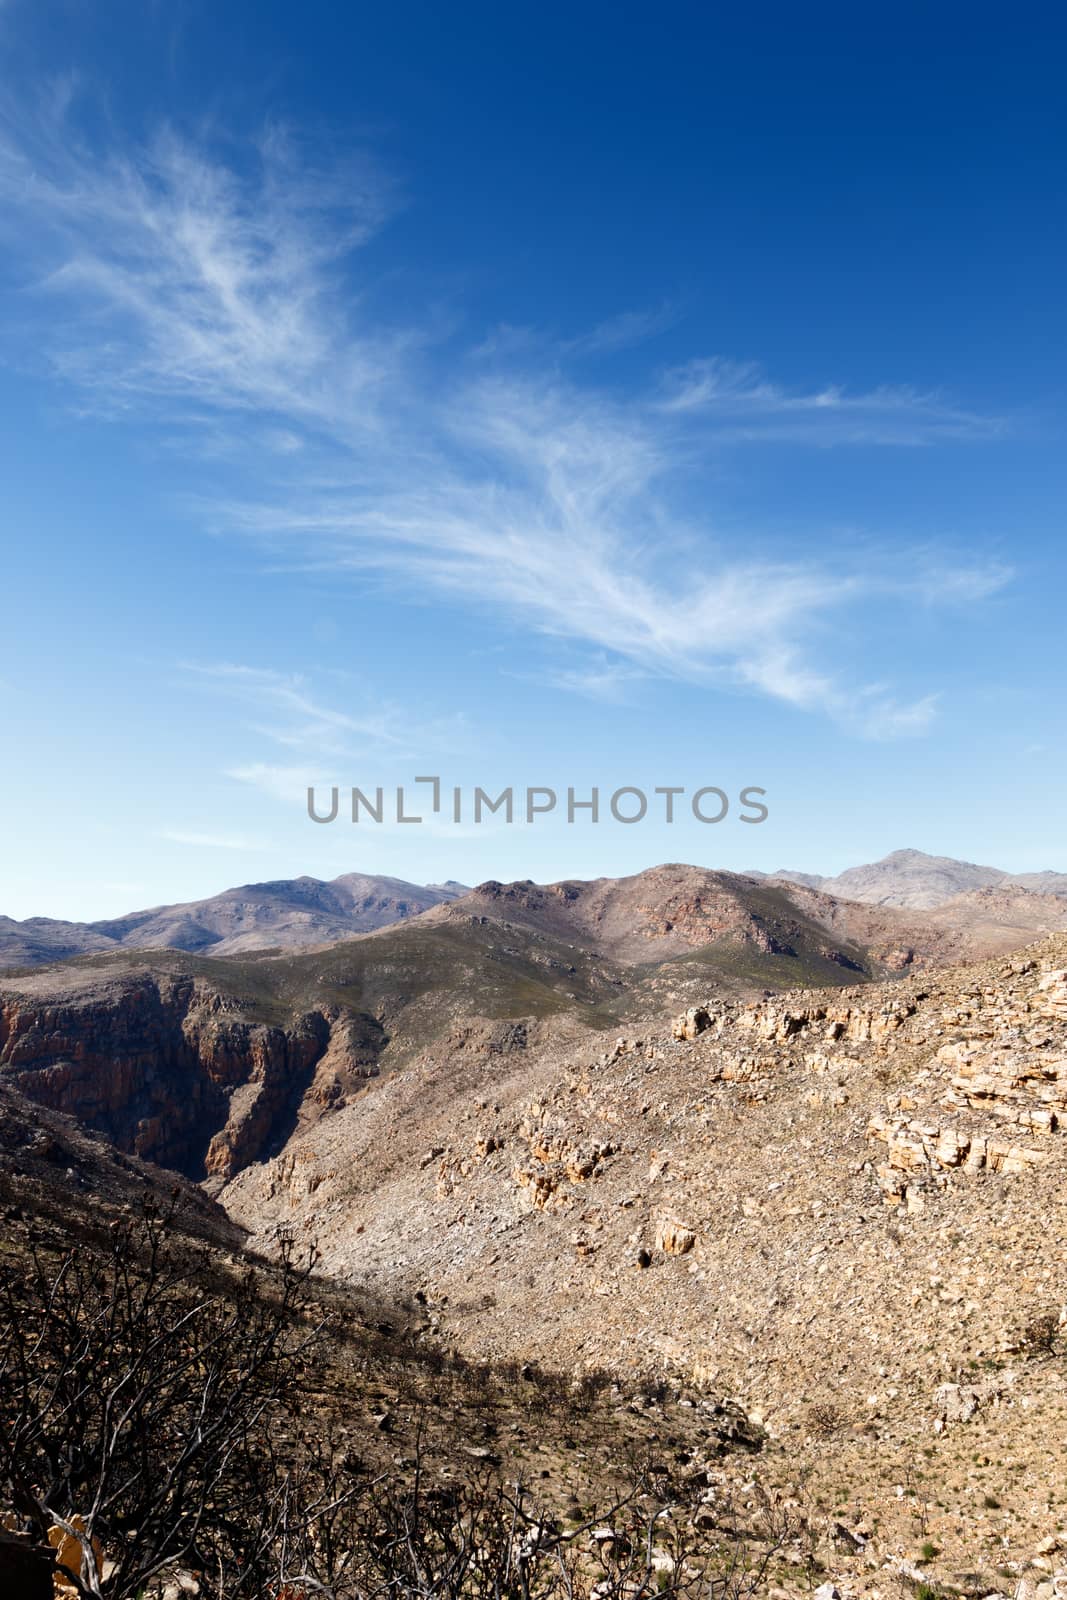 Lines - The Swartberg mountains are a mountain range in the Western Cape province of South Africa. It is composed of two main mountain chains running roughly east-west along the northern edge of the semi-arid Little Karoo.